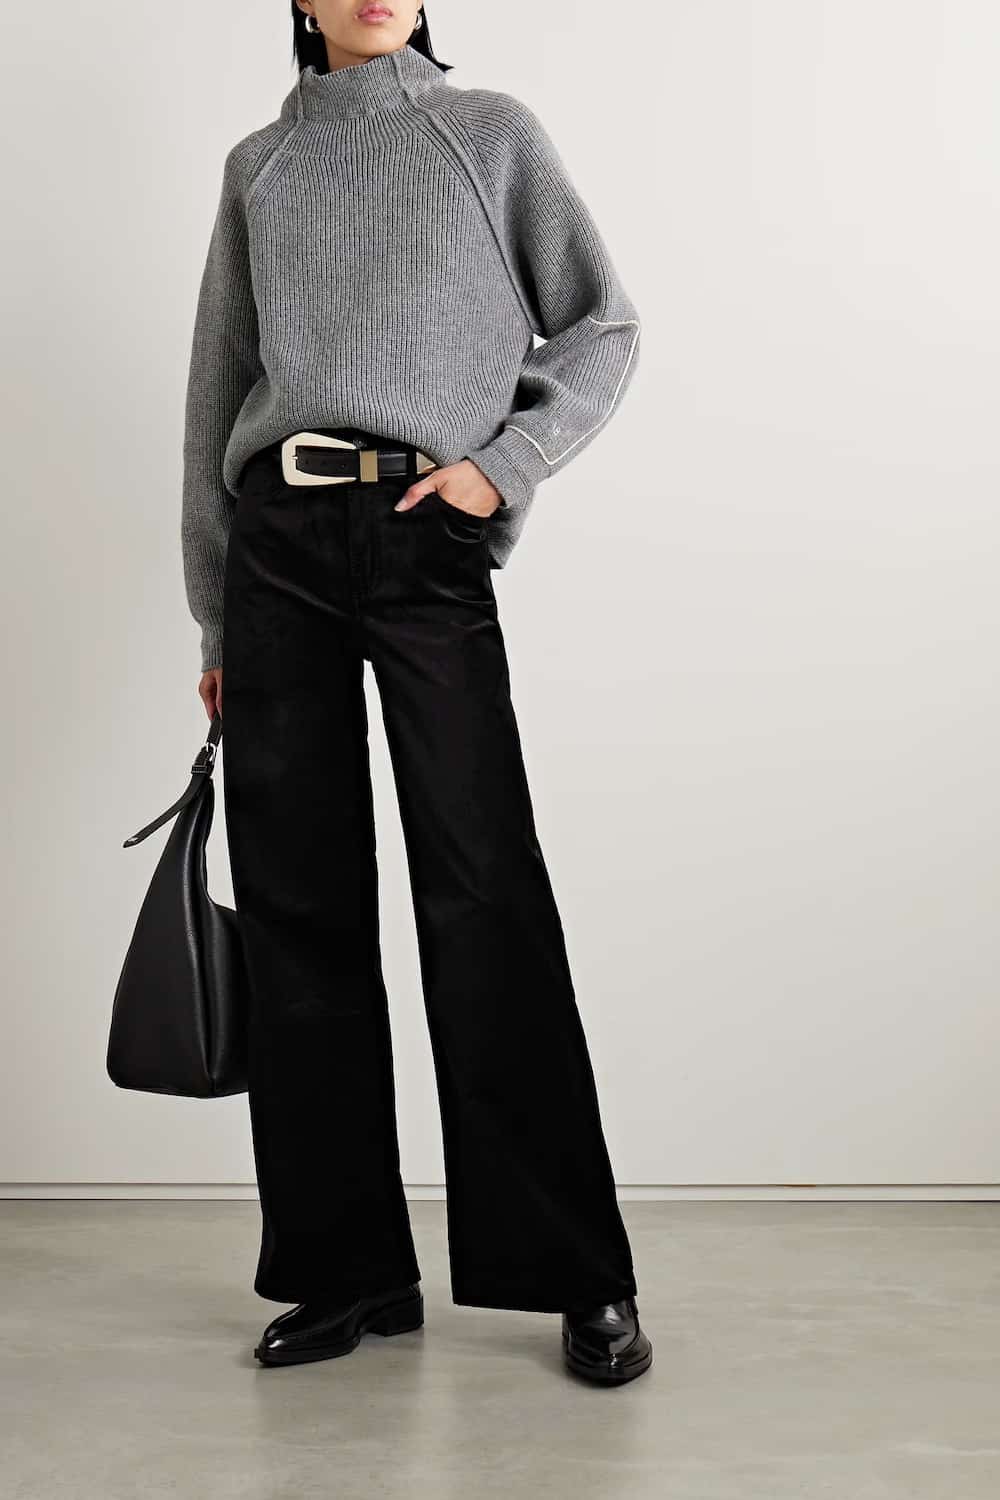 Woman wearing black velvet wide leg pants with a grey turtleneck sweater and loafers.